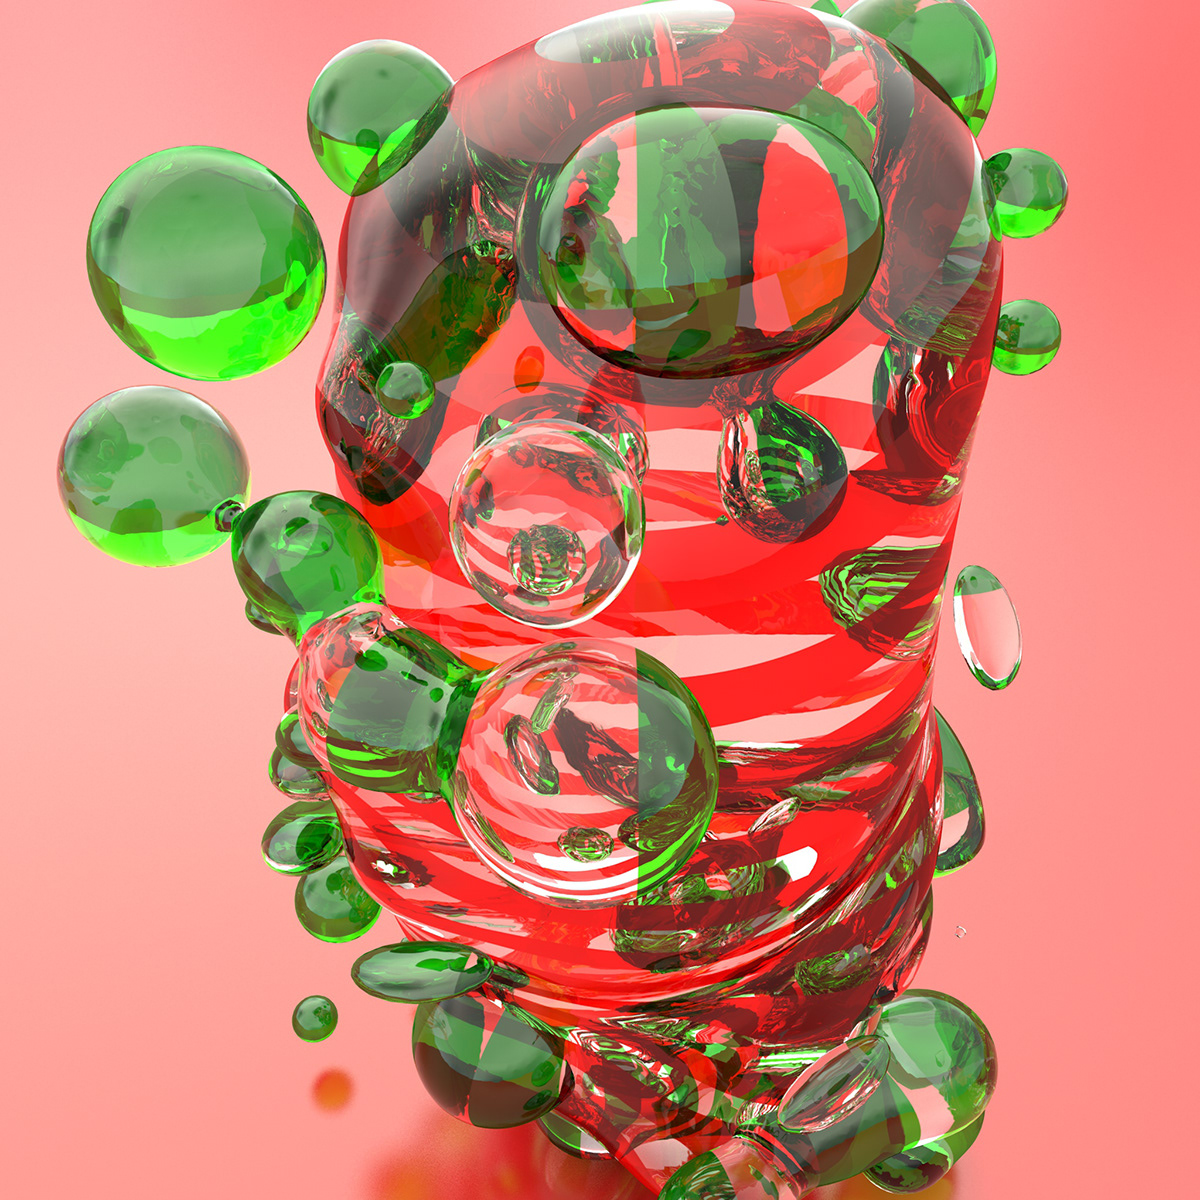 everyday Project 3D Experimentation cinema 4d daily project brand Character Sci-fi stylframes